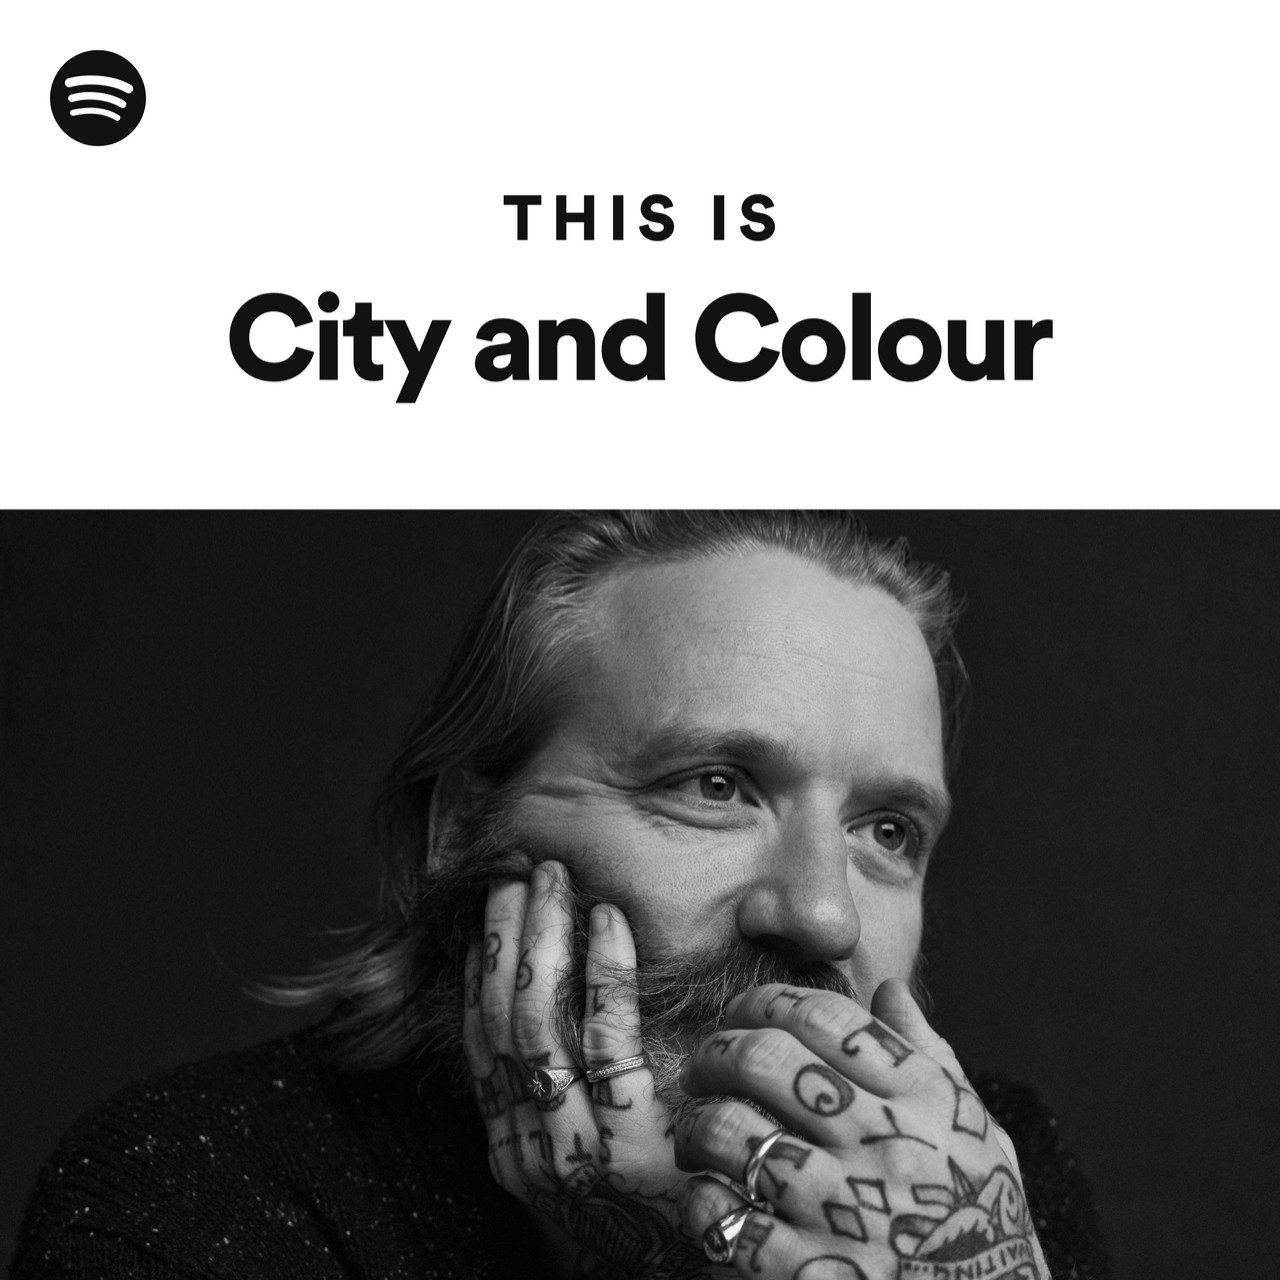 This Is City and Colour